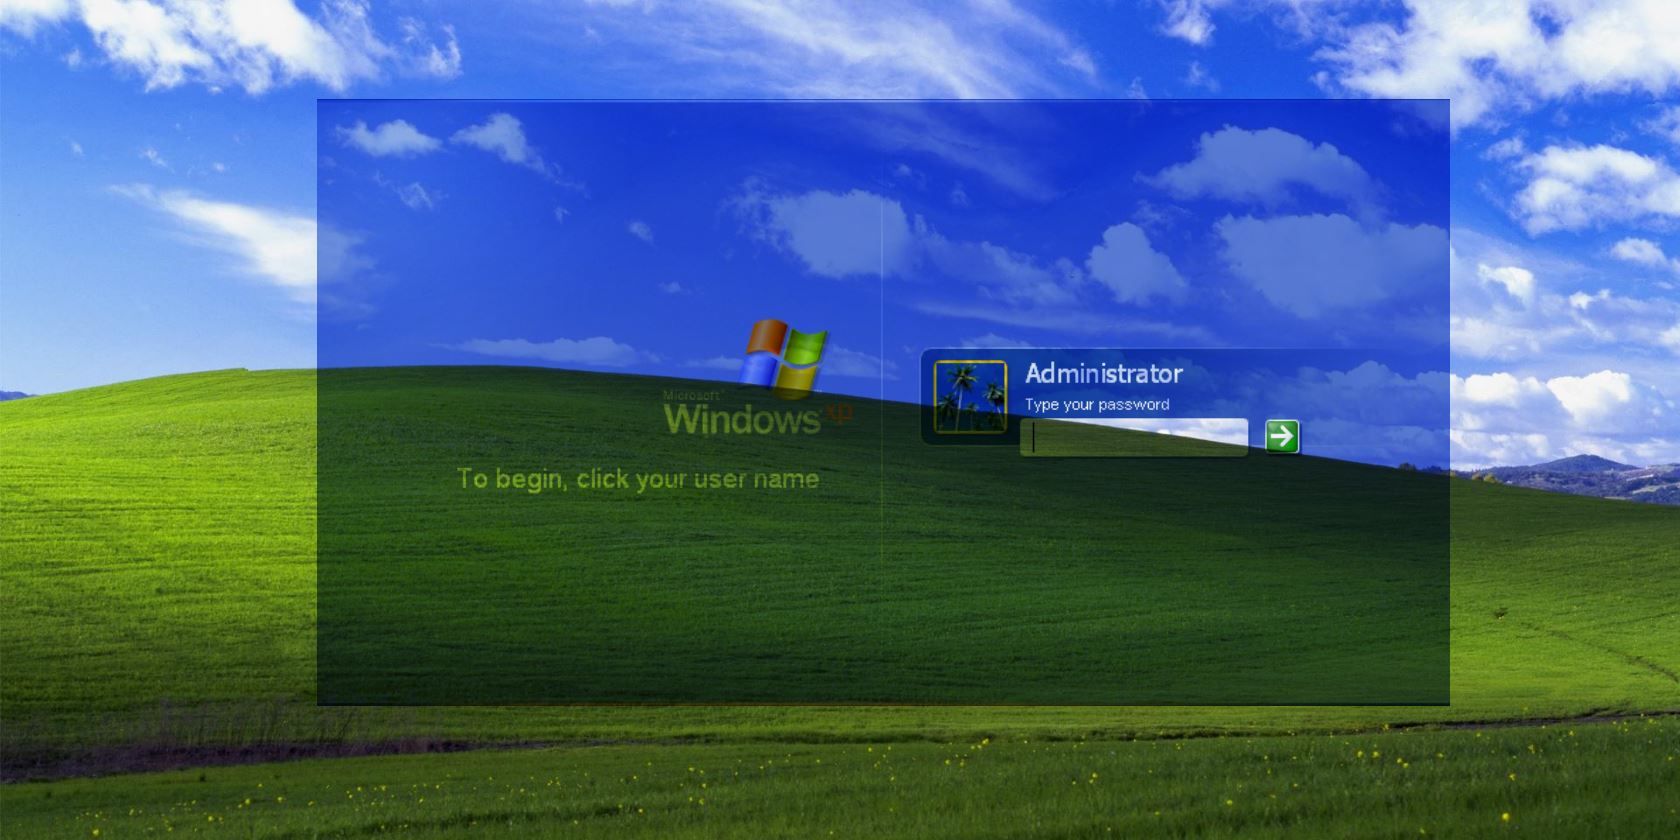 5 Tips to Reset the Administrator Password in Windows XP